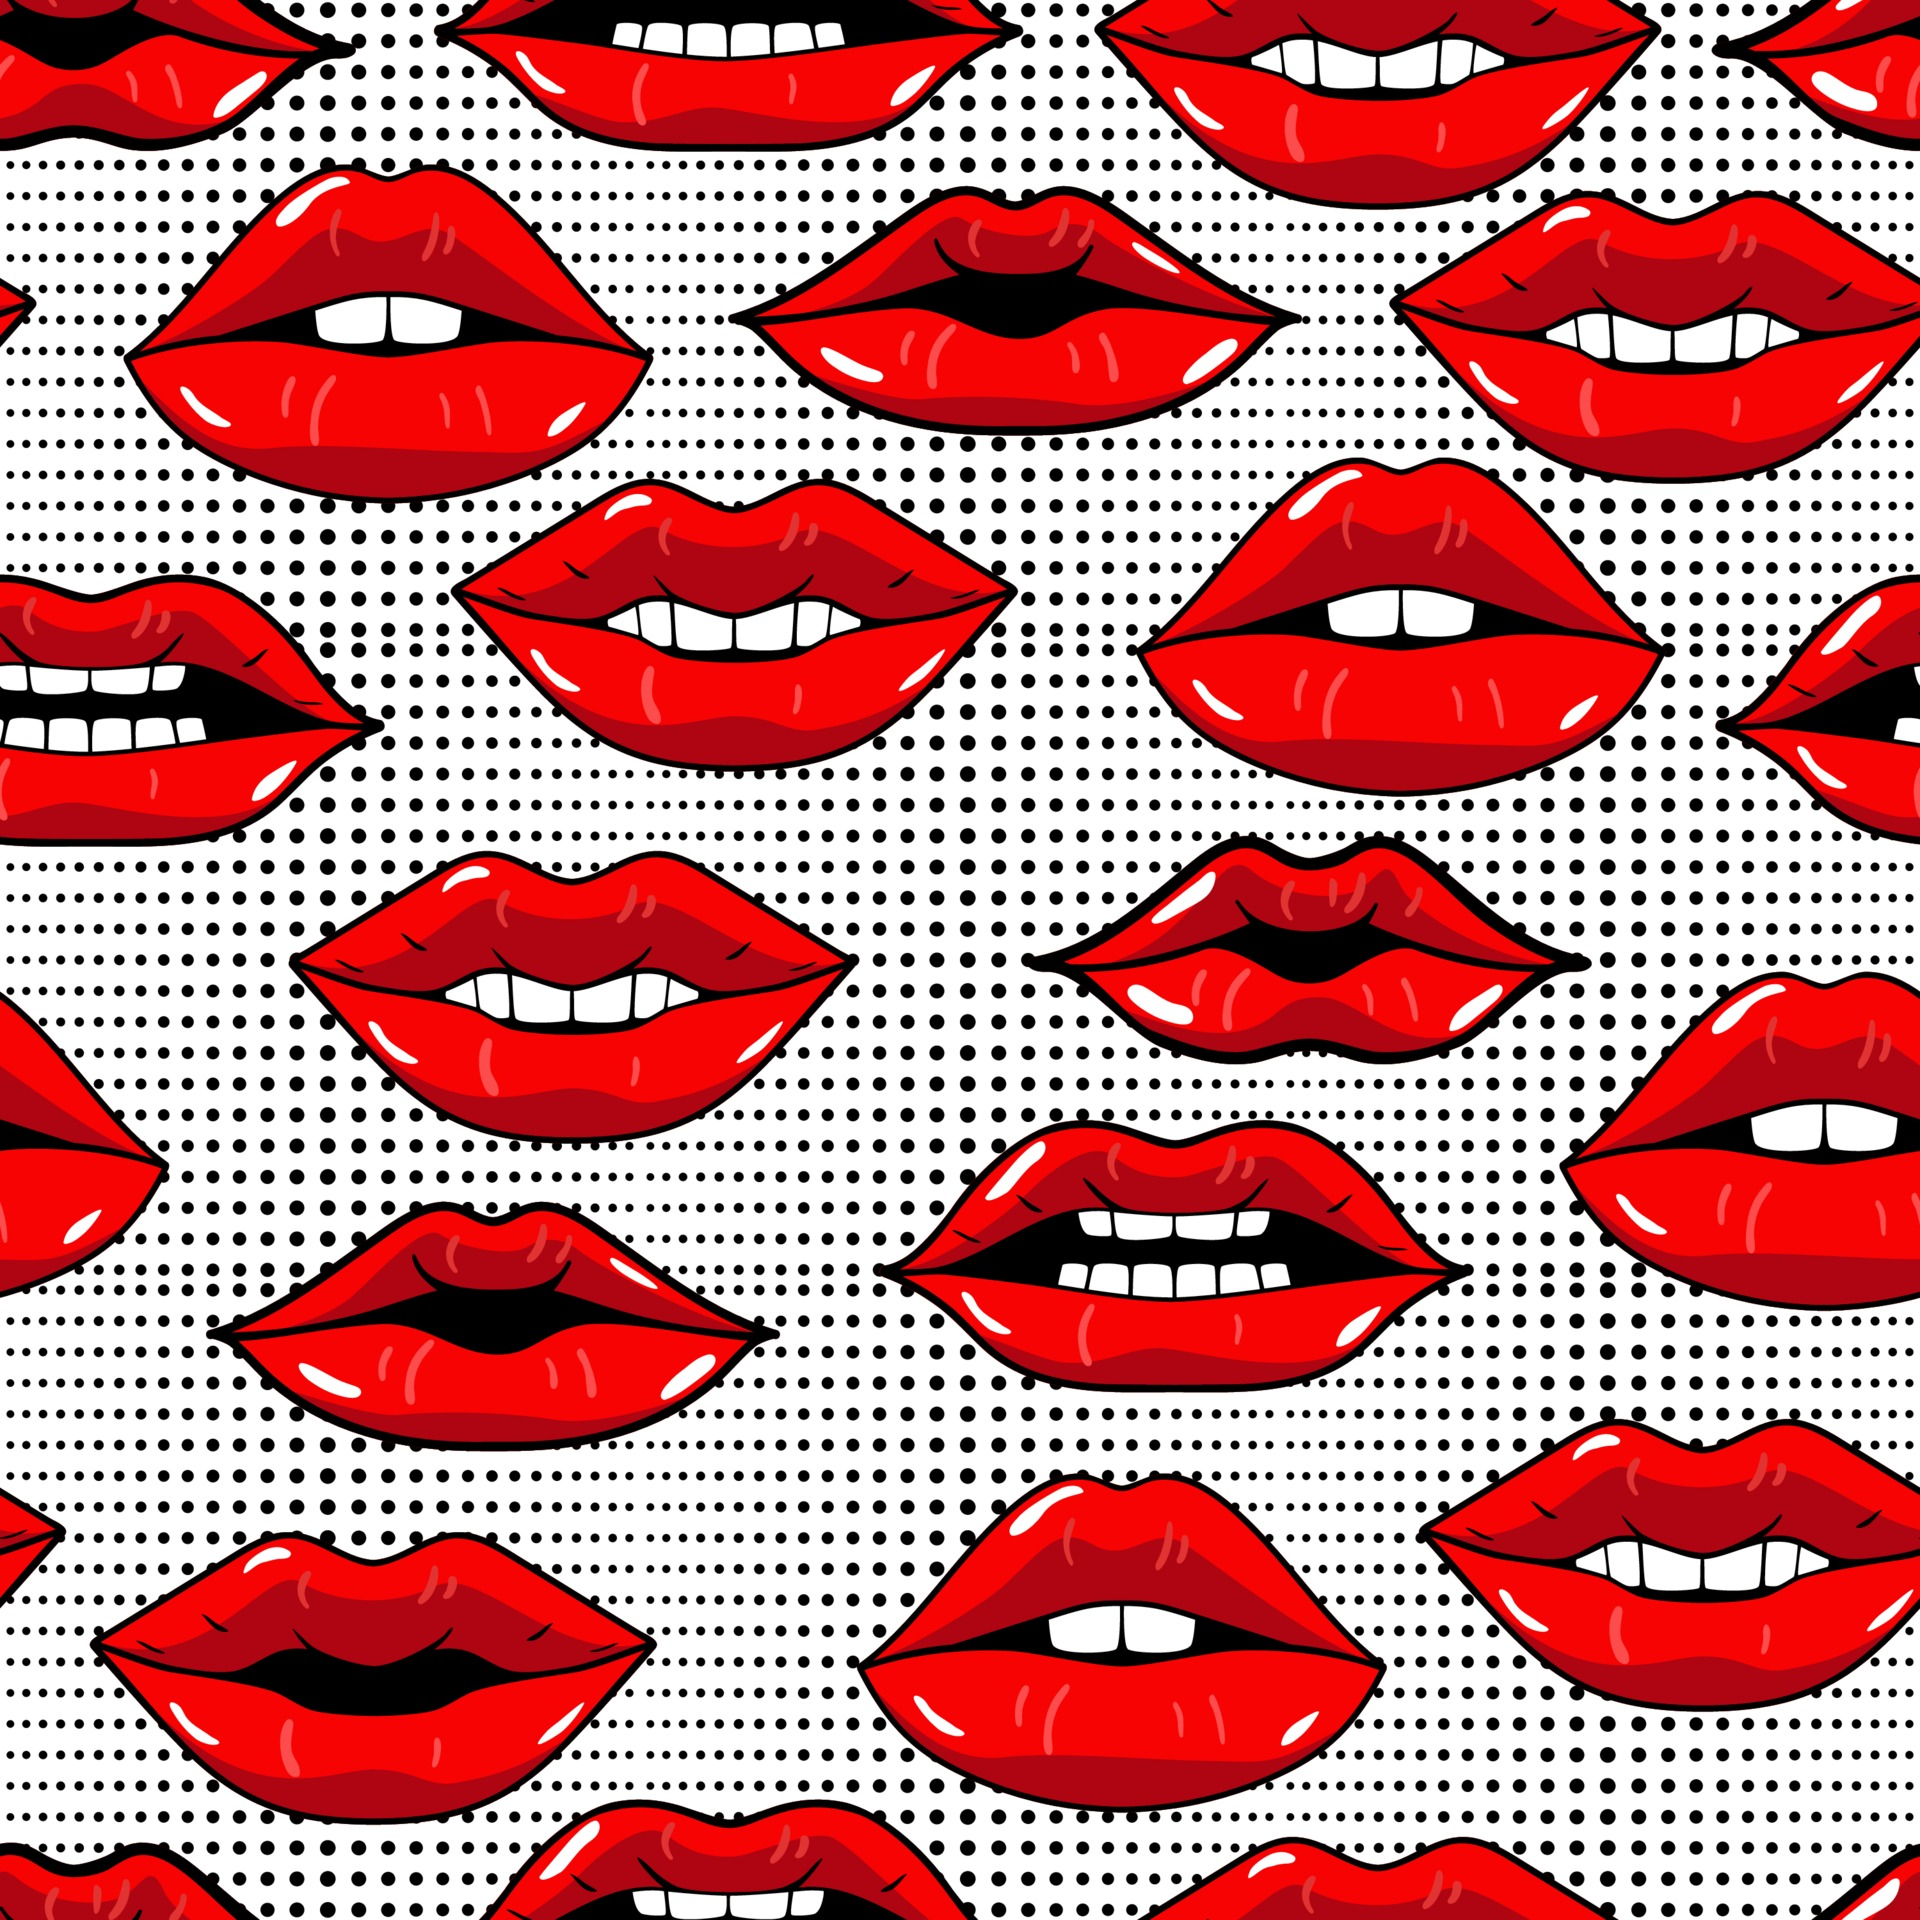 1920x1920 Seamless pattern with red lips in pop art style on abstract background with dots. Beauty repeated backdrop. Girlish wallpaper. Dots and kiss lips. Colorful cartoon style. 2353839 Vector Art